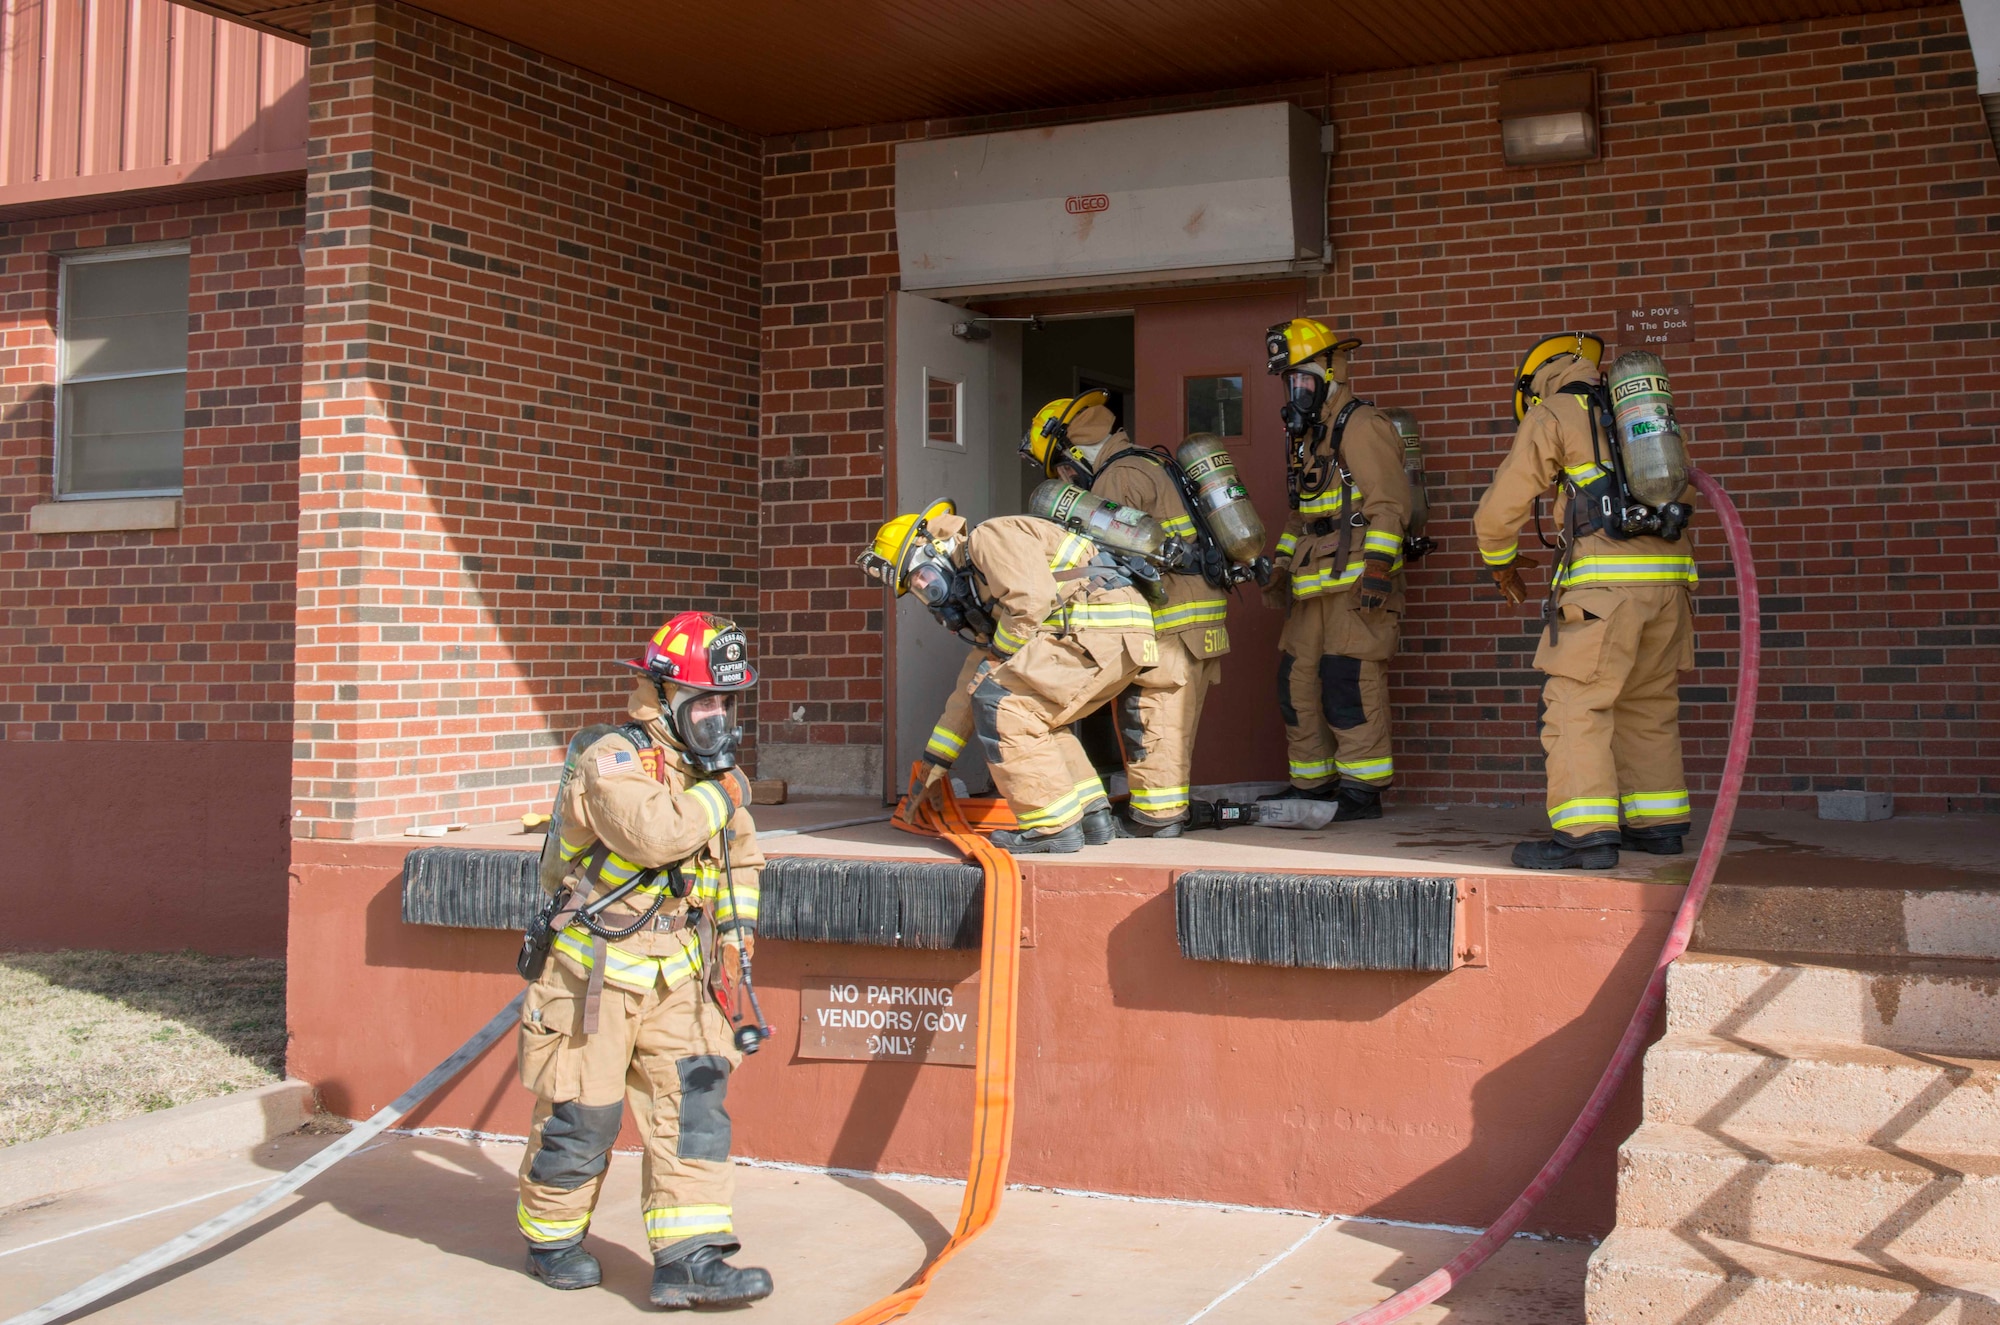 U.S. Air Force Airmen assigned to the 7th Civil Engineer Squadron Fire Department, prepare to go inside a simulated burning building at Dyess Air Force Base, Texas, Feb. 8, 2017. The 7th CES Fire Department conducted a library structural drill to prepare the Airmen for real-world scenarios. During this drill, they learn how to track down the source of the fire, how to best commit their resources to combating the fire and about the equipment used throughout these processes. (U.S. Air Force photo by Airman 1st Class Austin Mayfield)